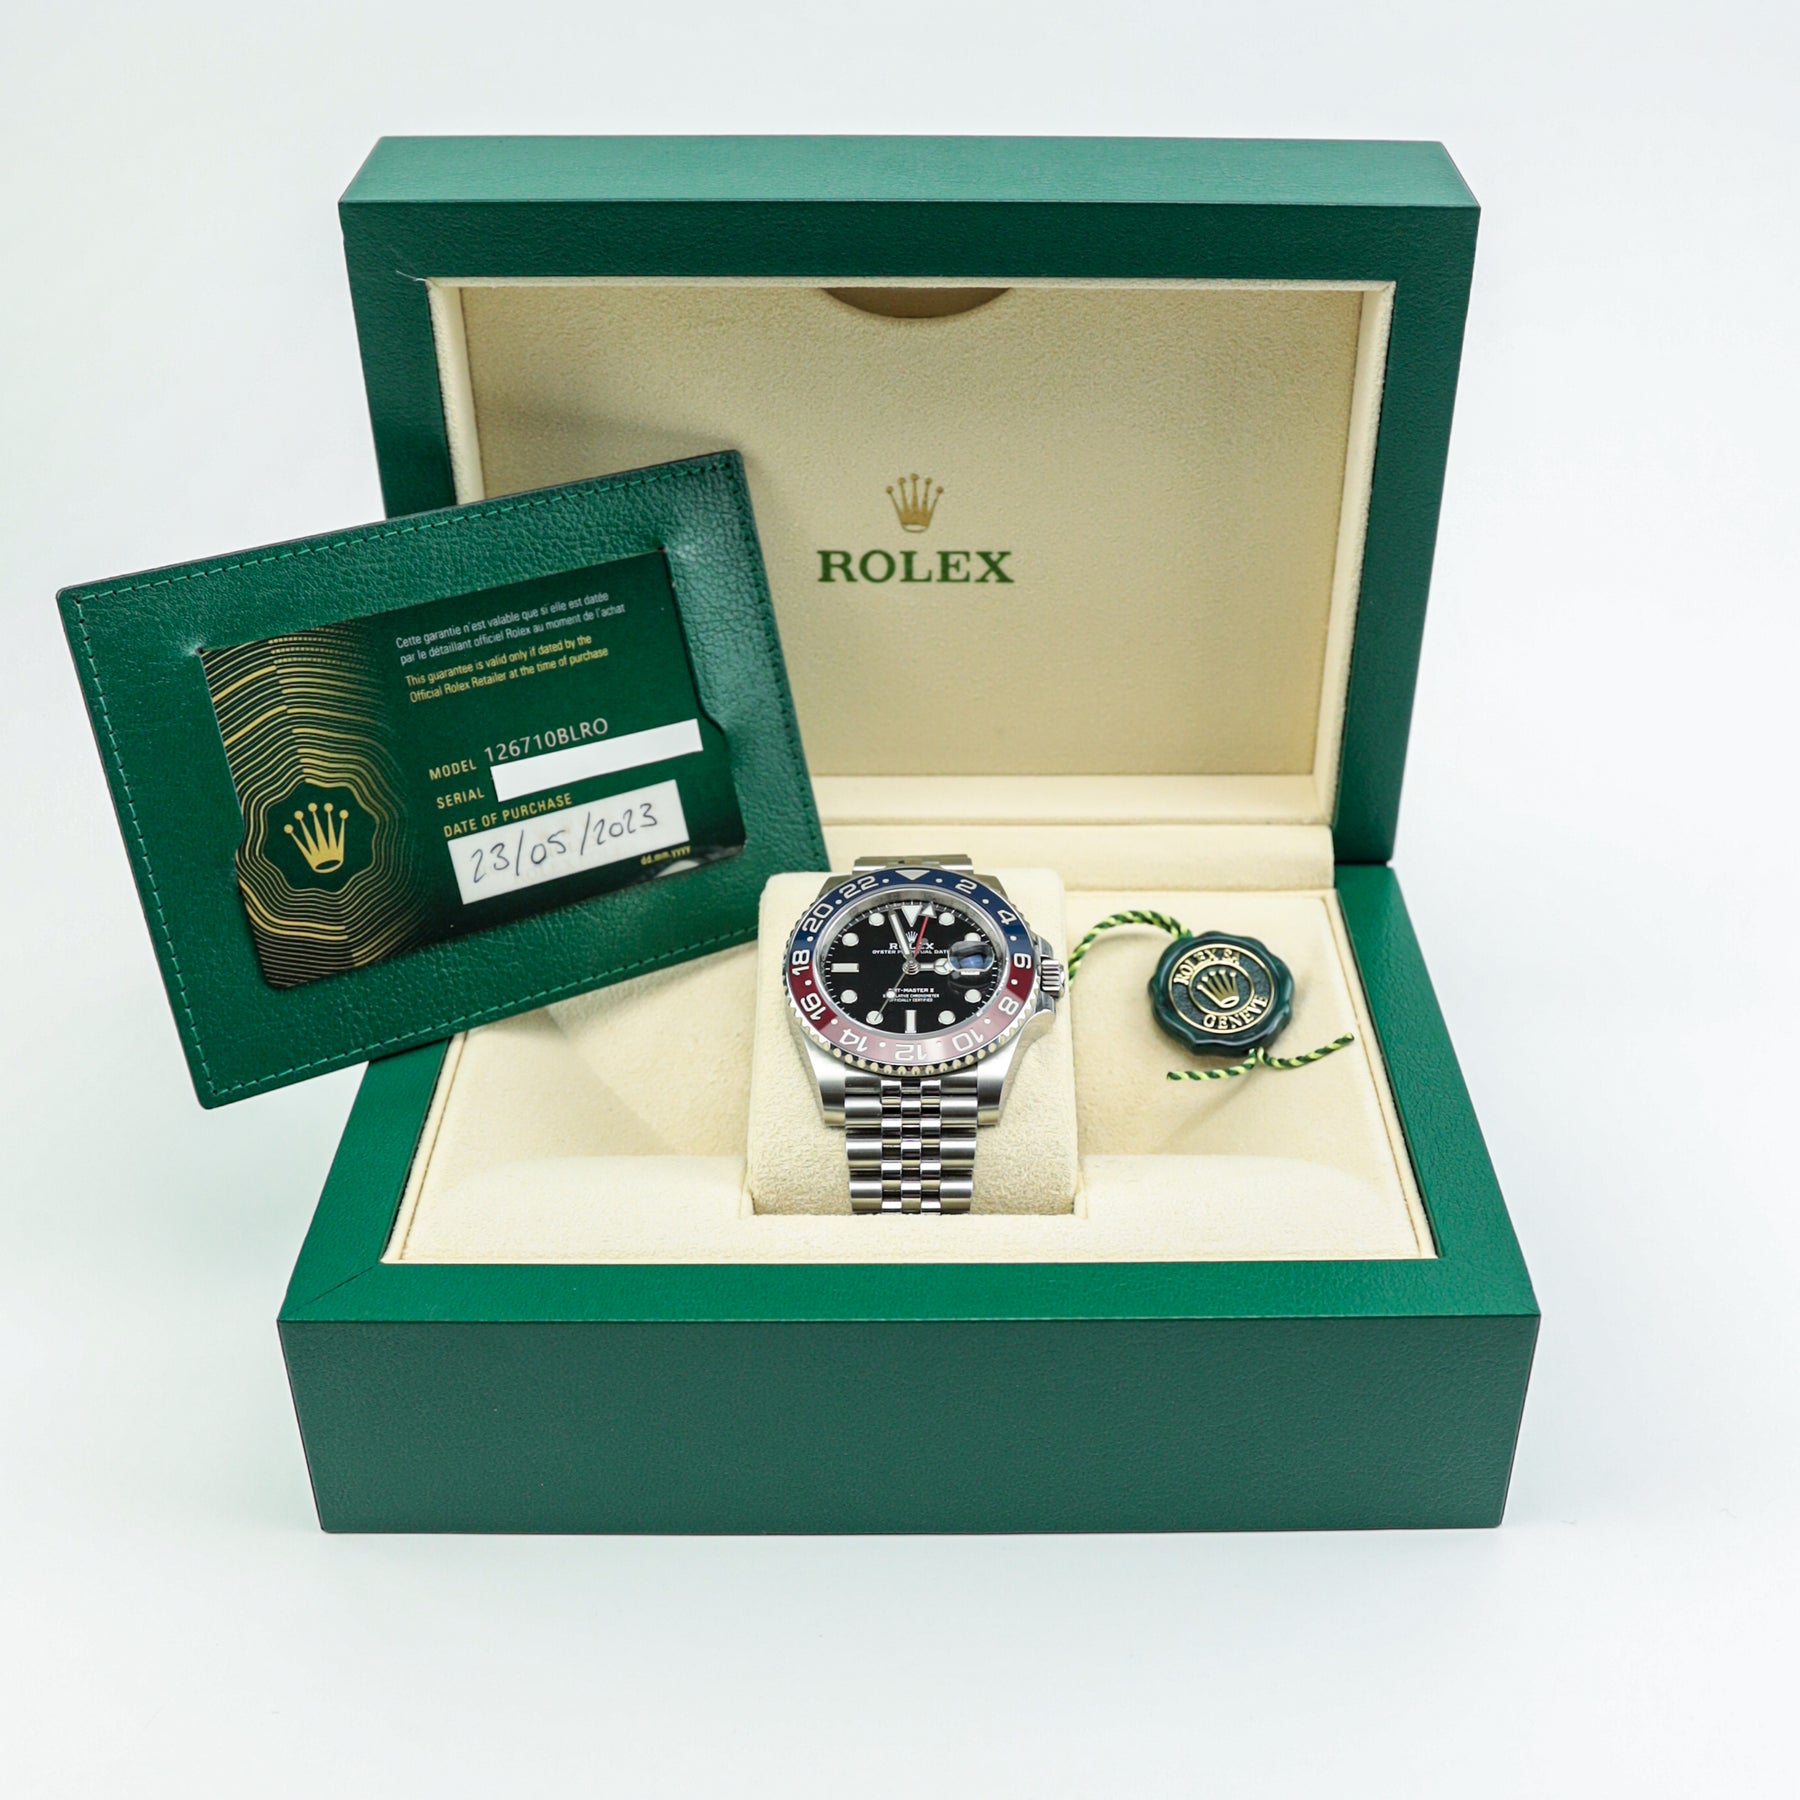 Pre - Owned Worn 2023 Rolex GMT-MASTER II 'Pepsi' 126710BLRO Full set with box & papers available at RR JEWELLERS YARM